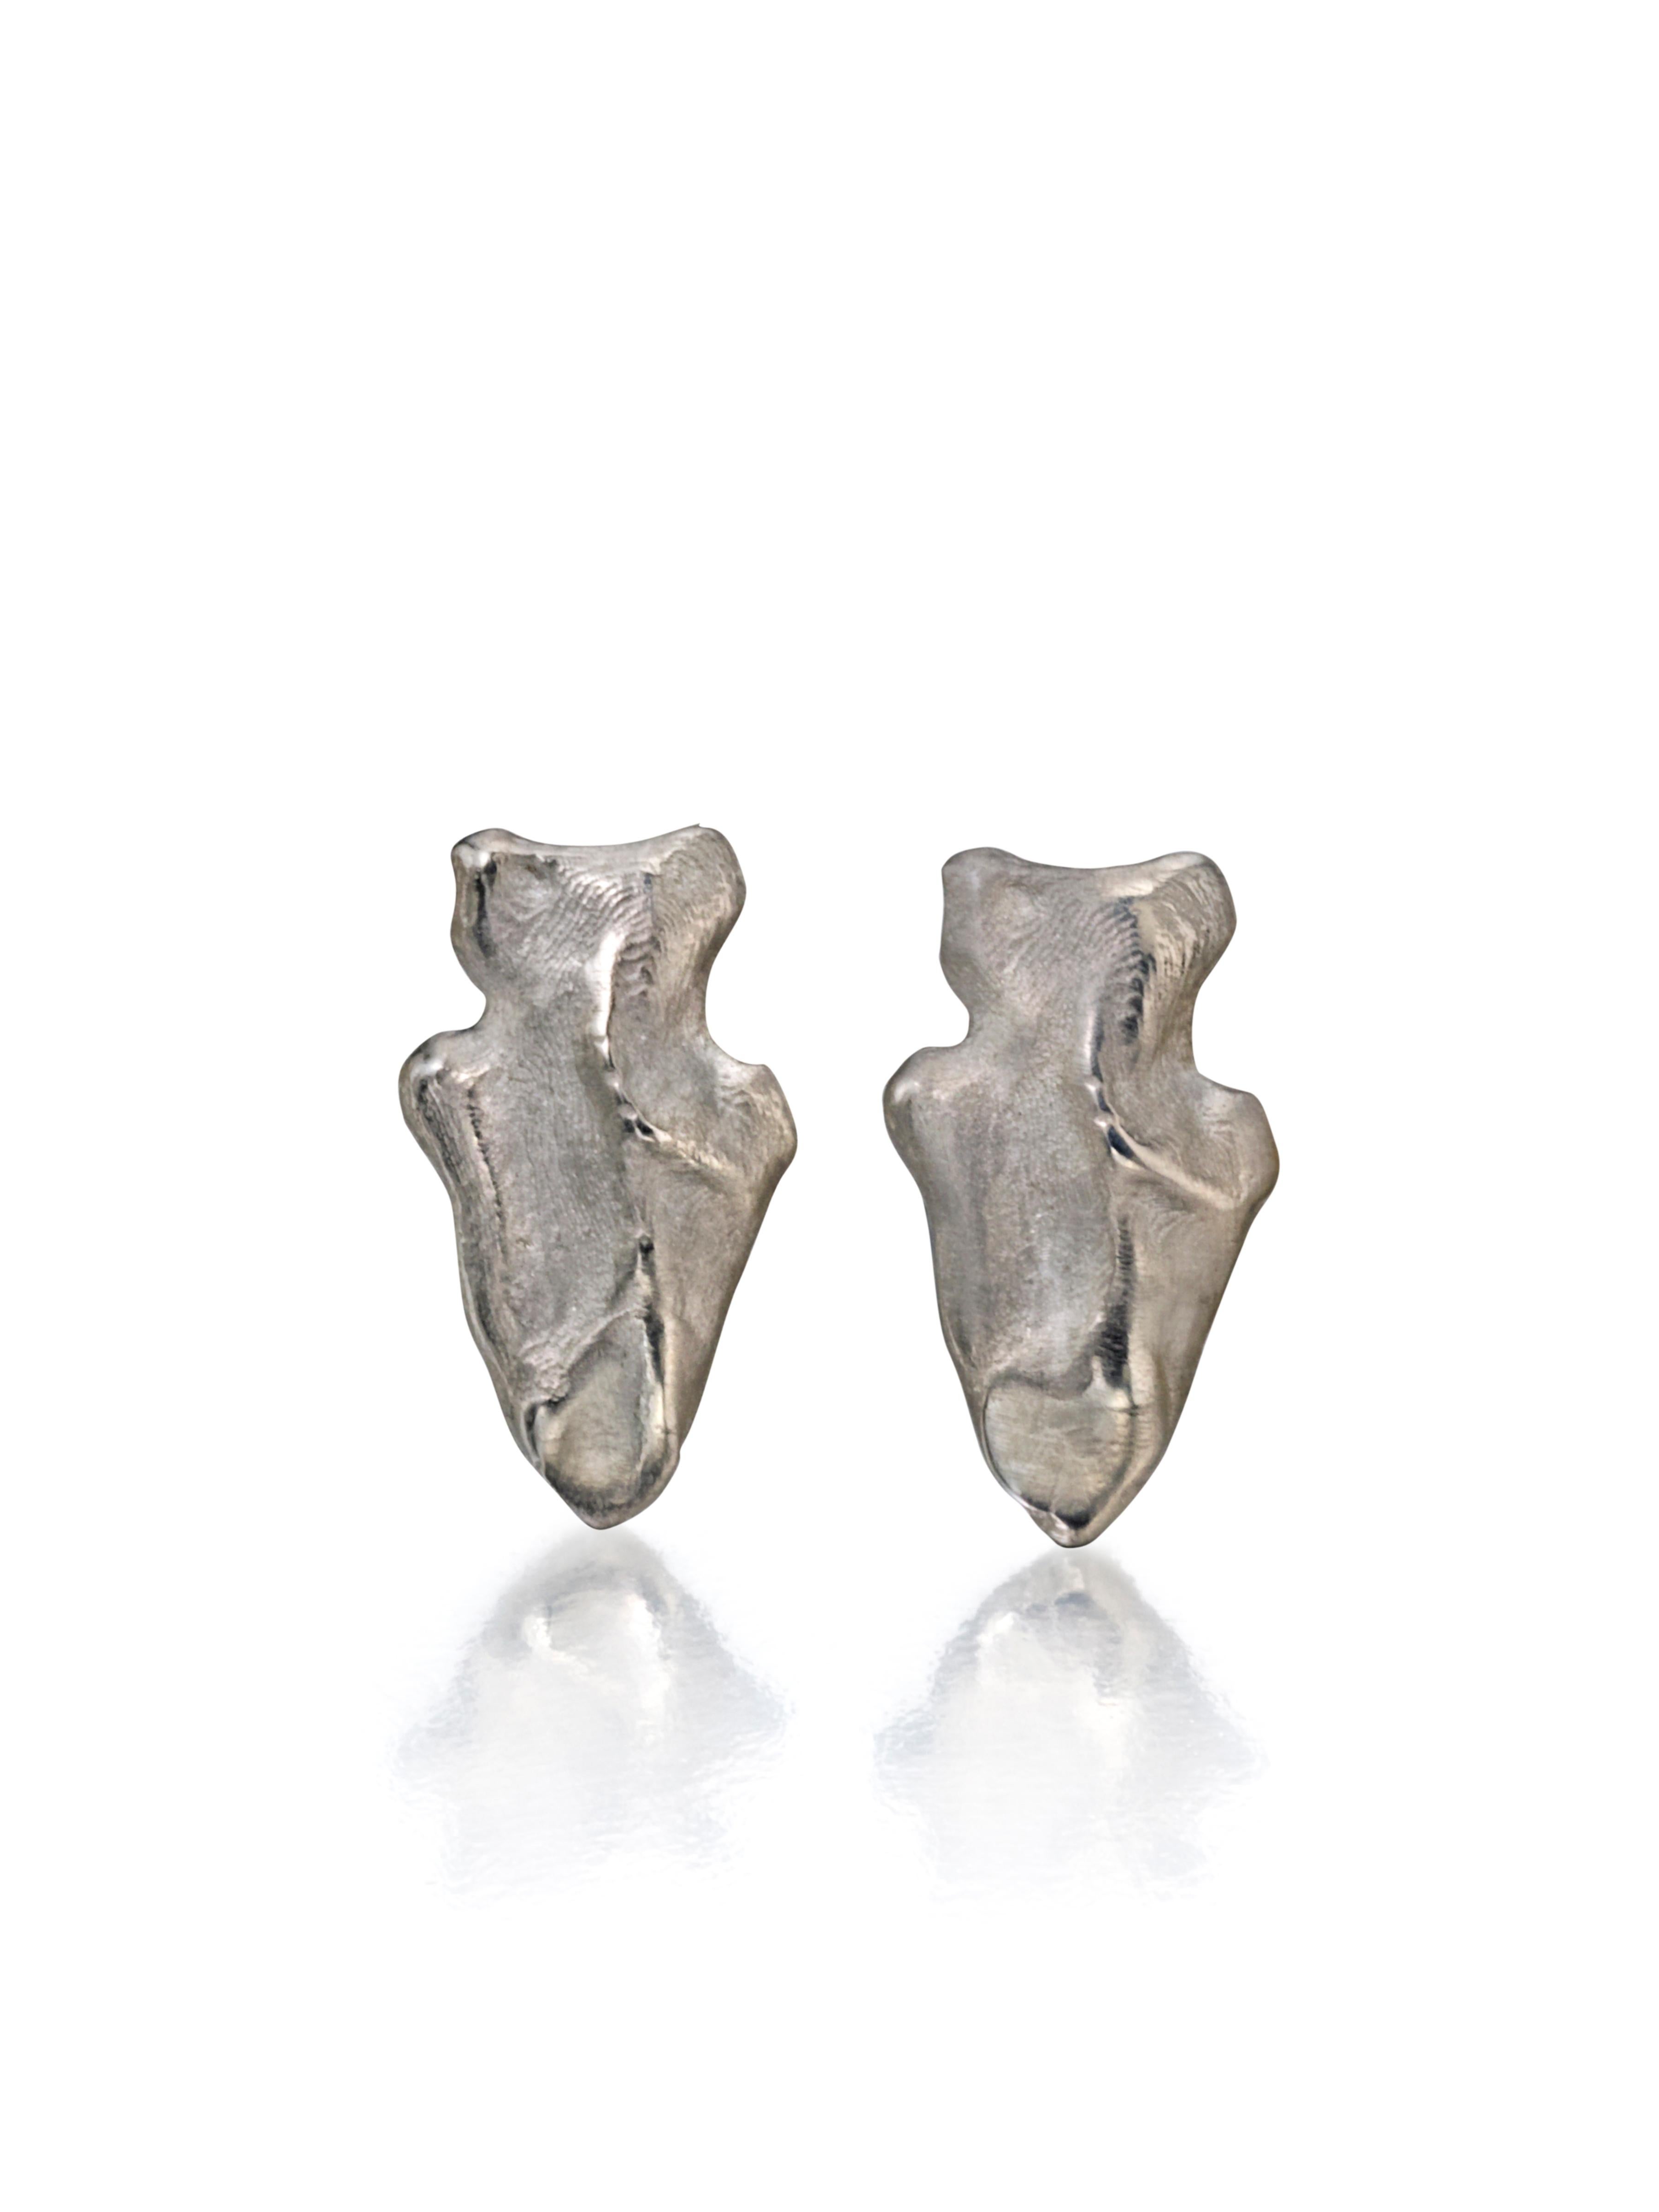 Contemporary Wendy Brandes Brushed Platinum Single Stud Arrowhead Earring For Sale